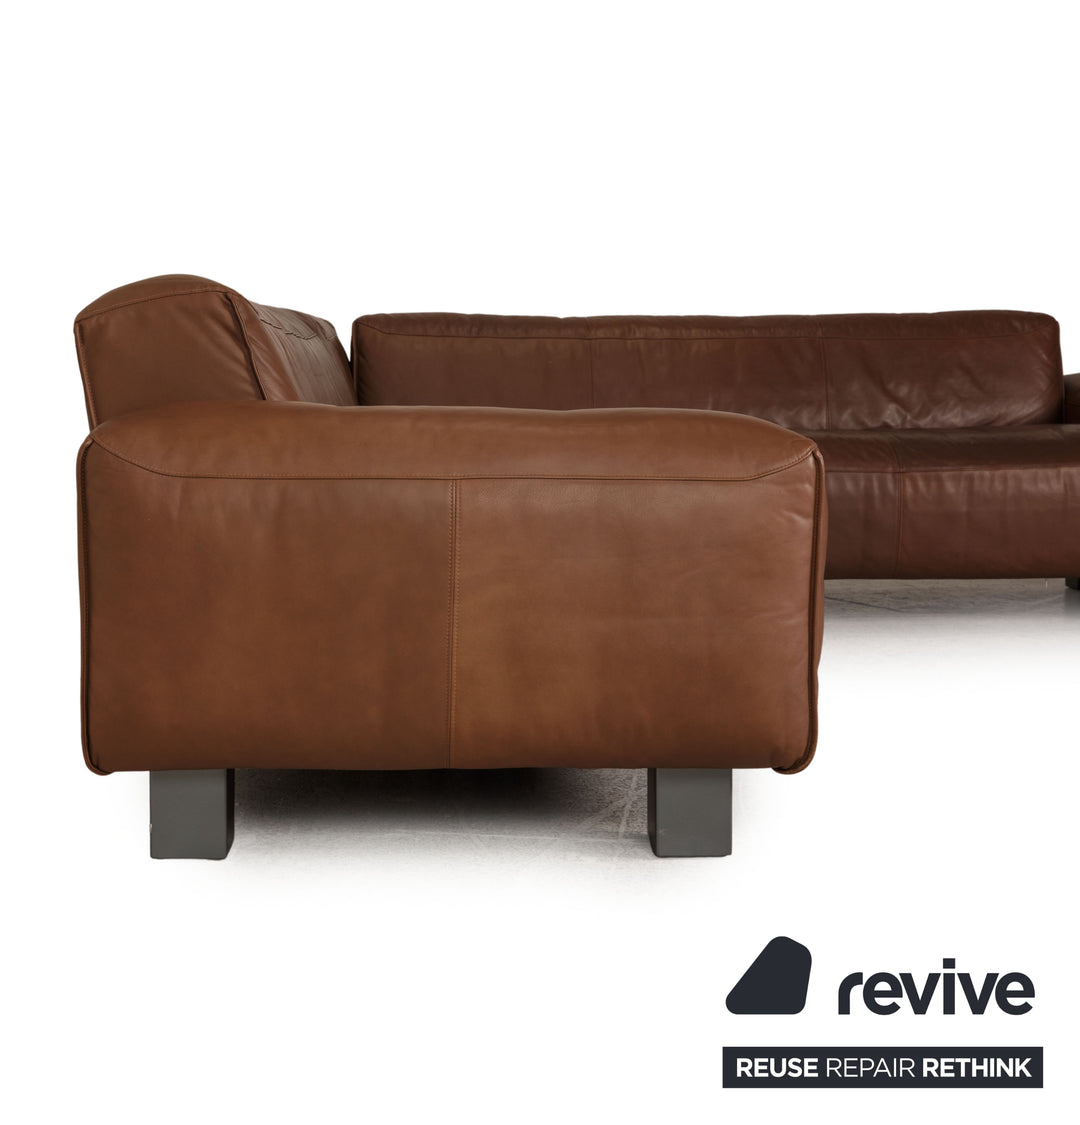 Rolf Benz Mio Leather Sofa Brown Corner Sofa Couch